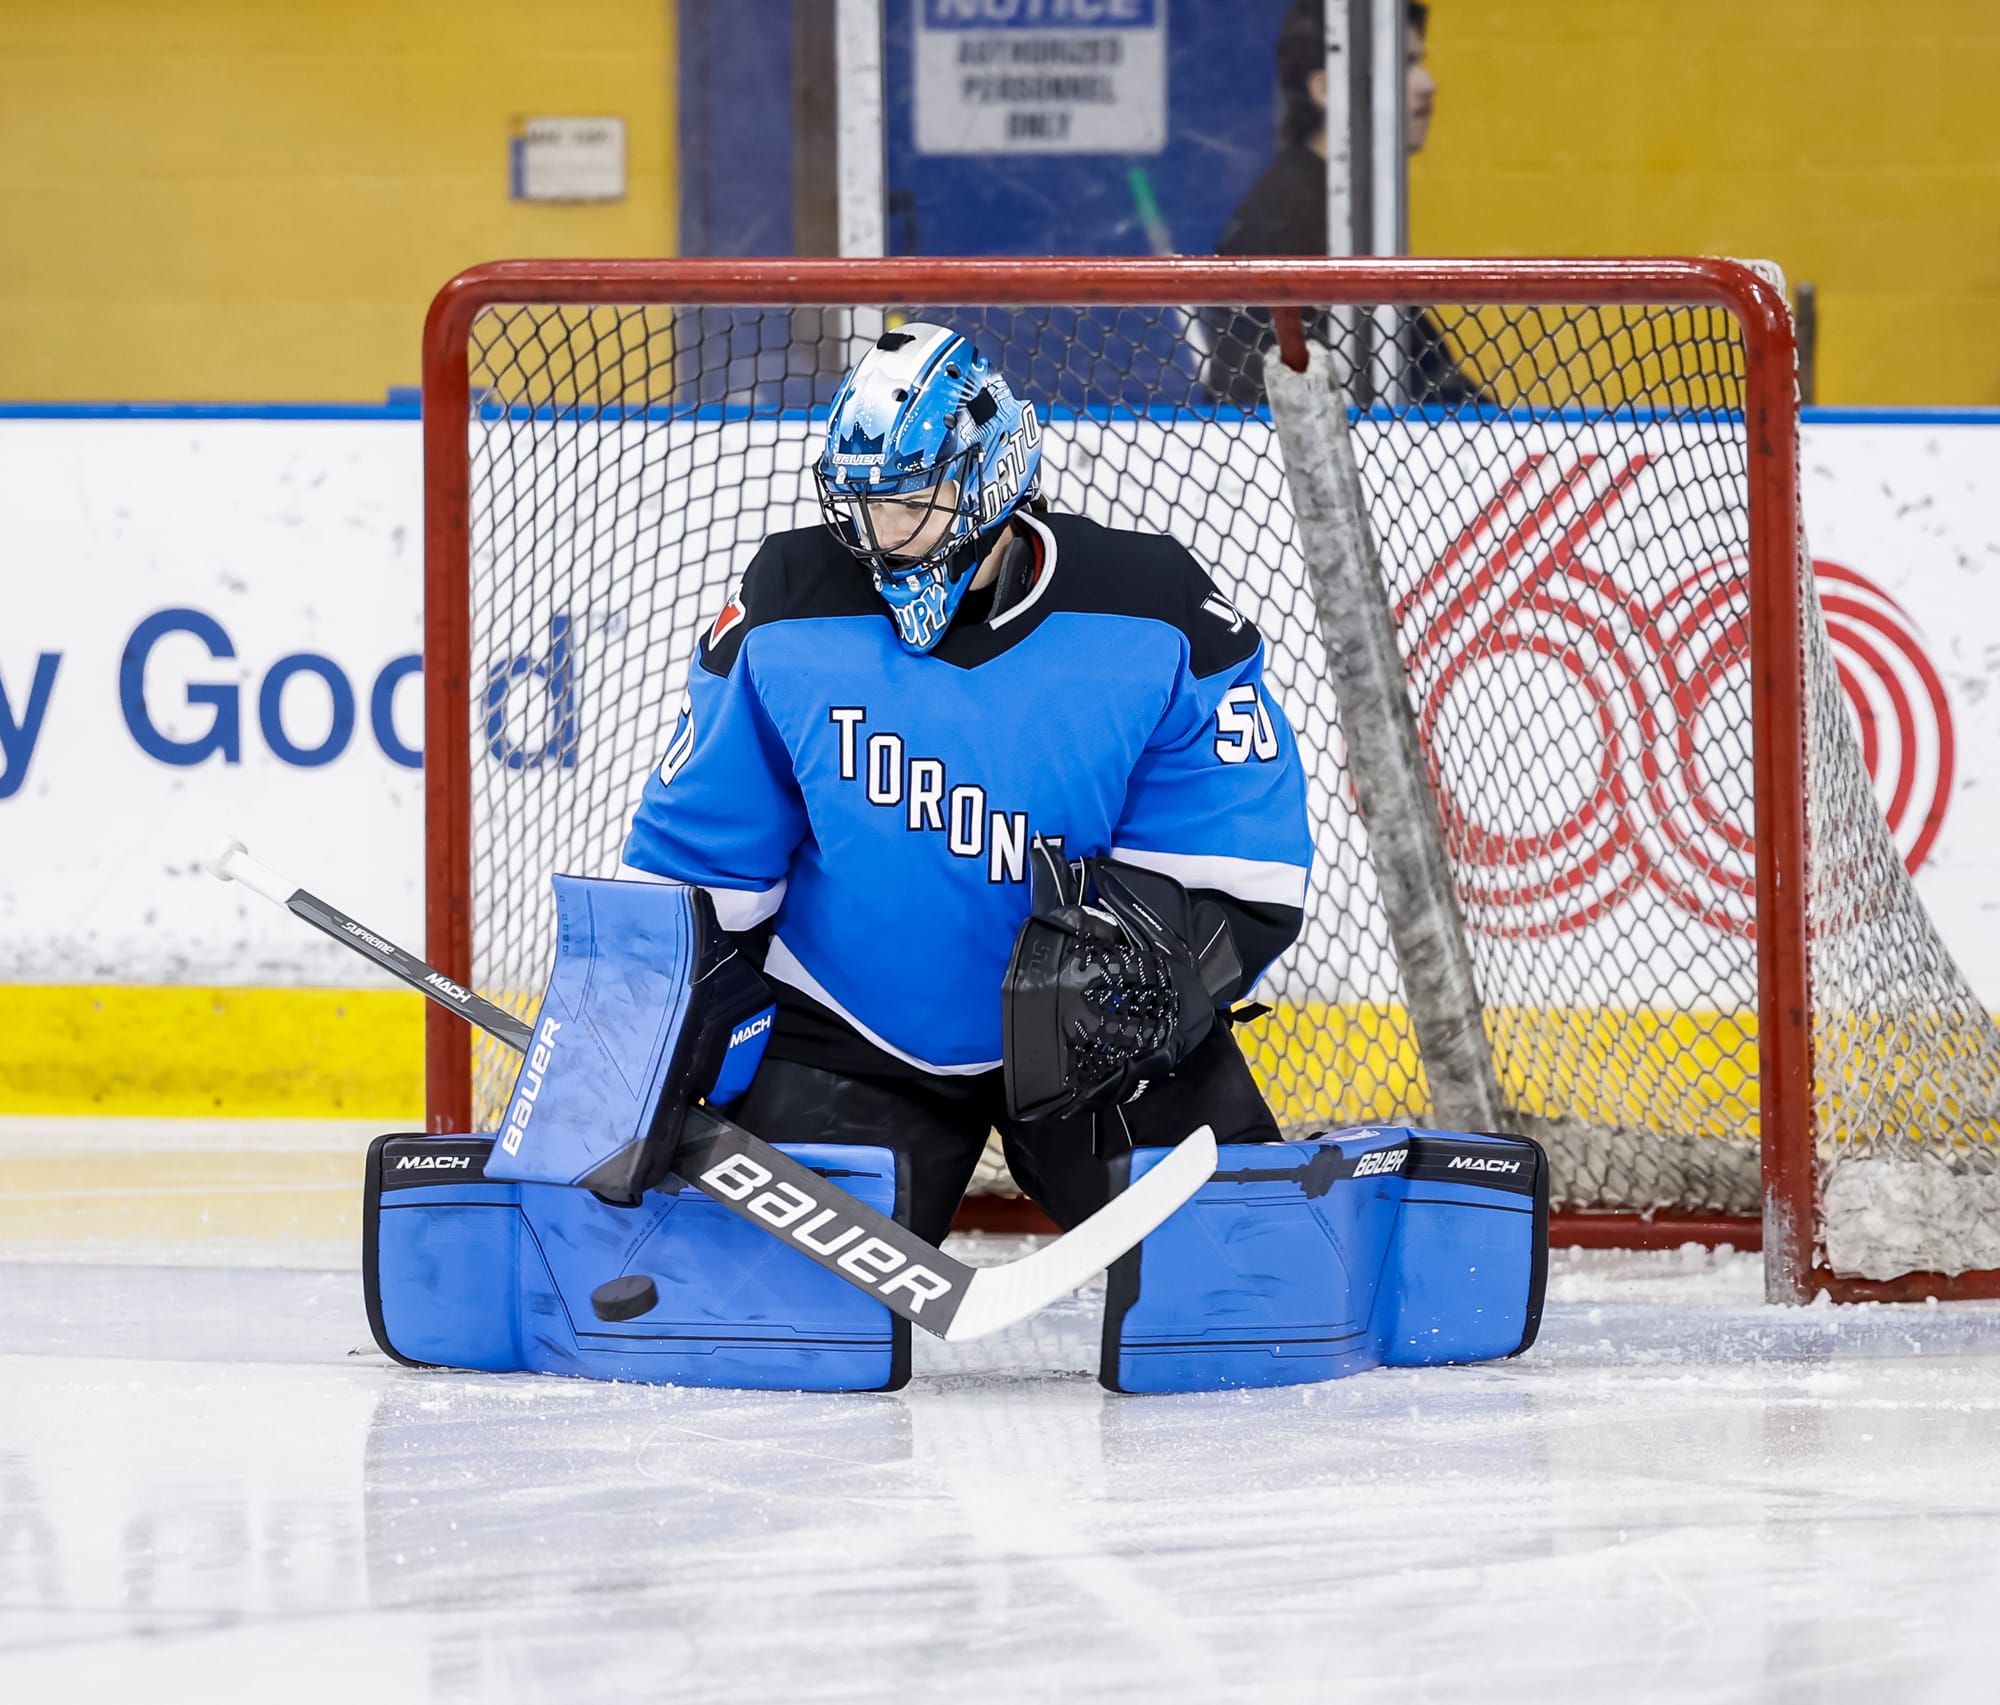 Kristen Campbell, wearing her blue Toronto gear and home jersey, makes a save during a game against Ottawa.